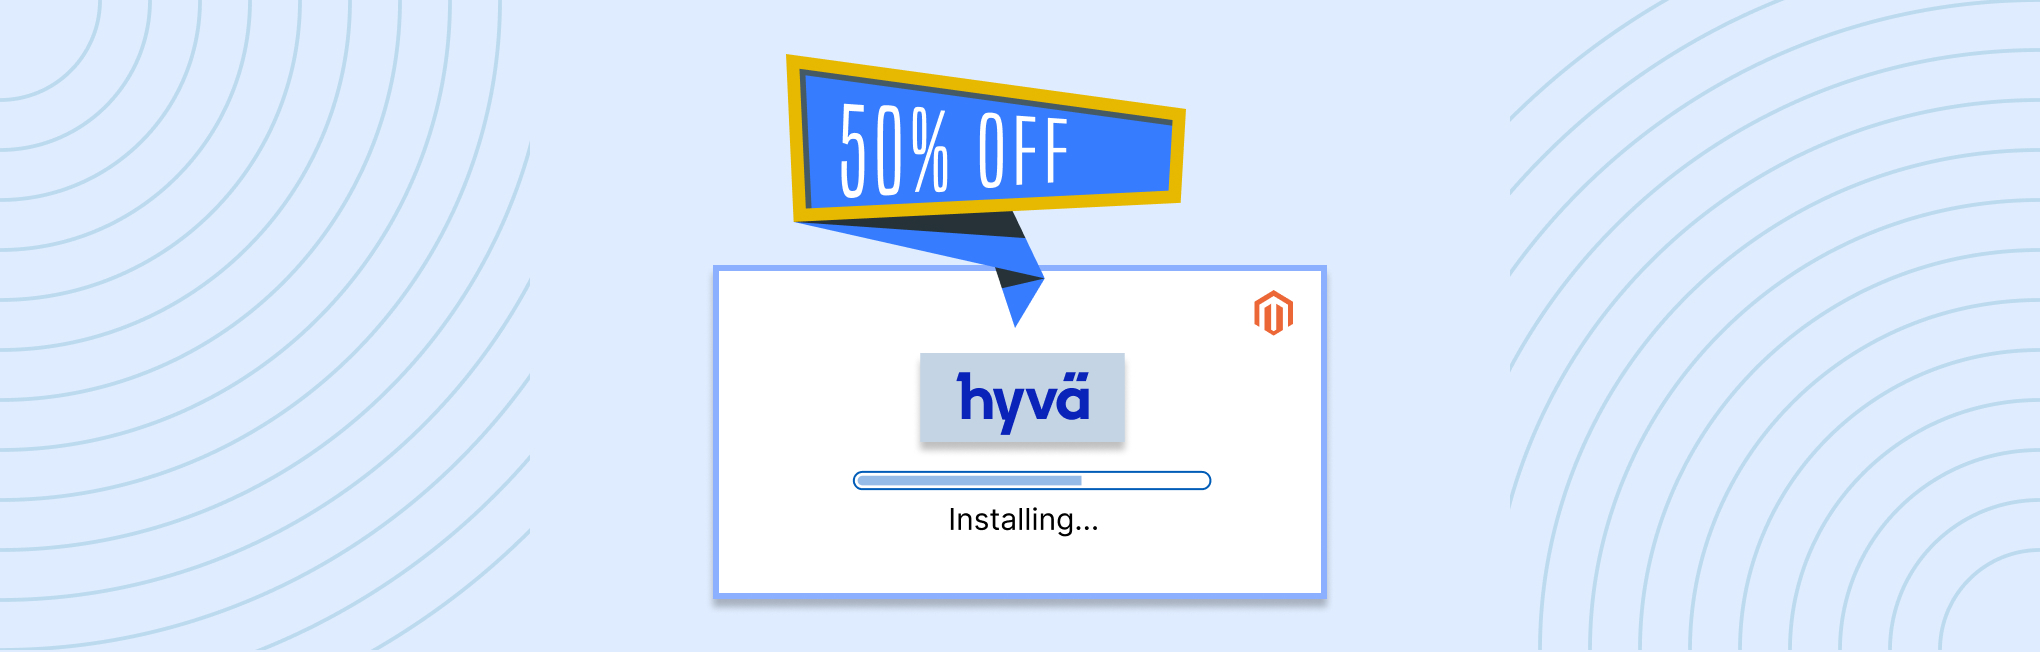 How to Cut Your Hyvä Implementation Costs in Half_